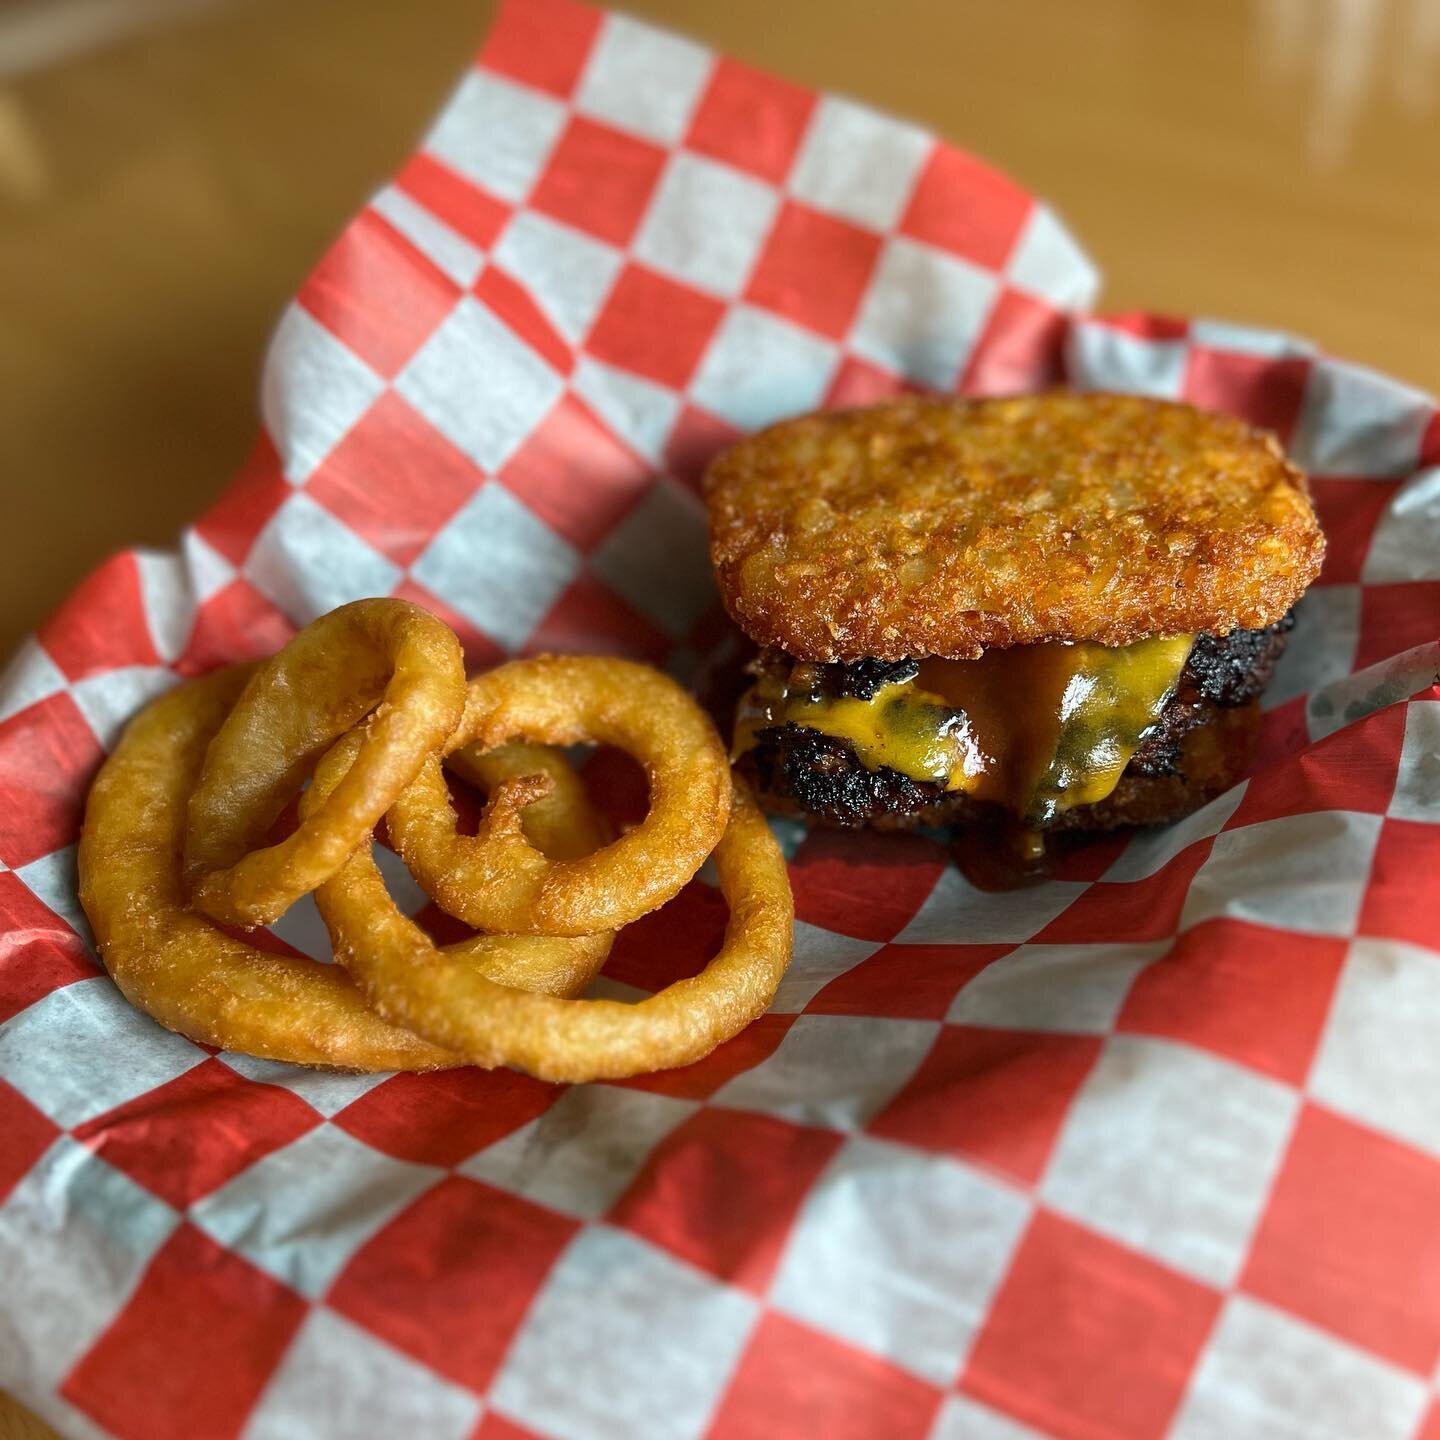 SPECIAL ALERT! &mdash; Come in and get this delicious SMASH BURGER, topped with cheddar and bbq sauce - served between crispy hashbrown patties&hellip; and to really treat yourself: add bacon! You deserve it 👌🏼

#jessiesbagels #lunchspecial #delici